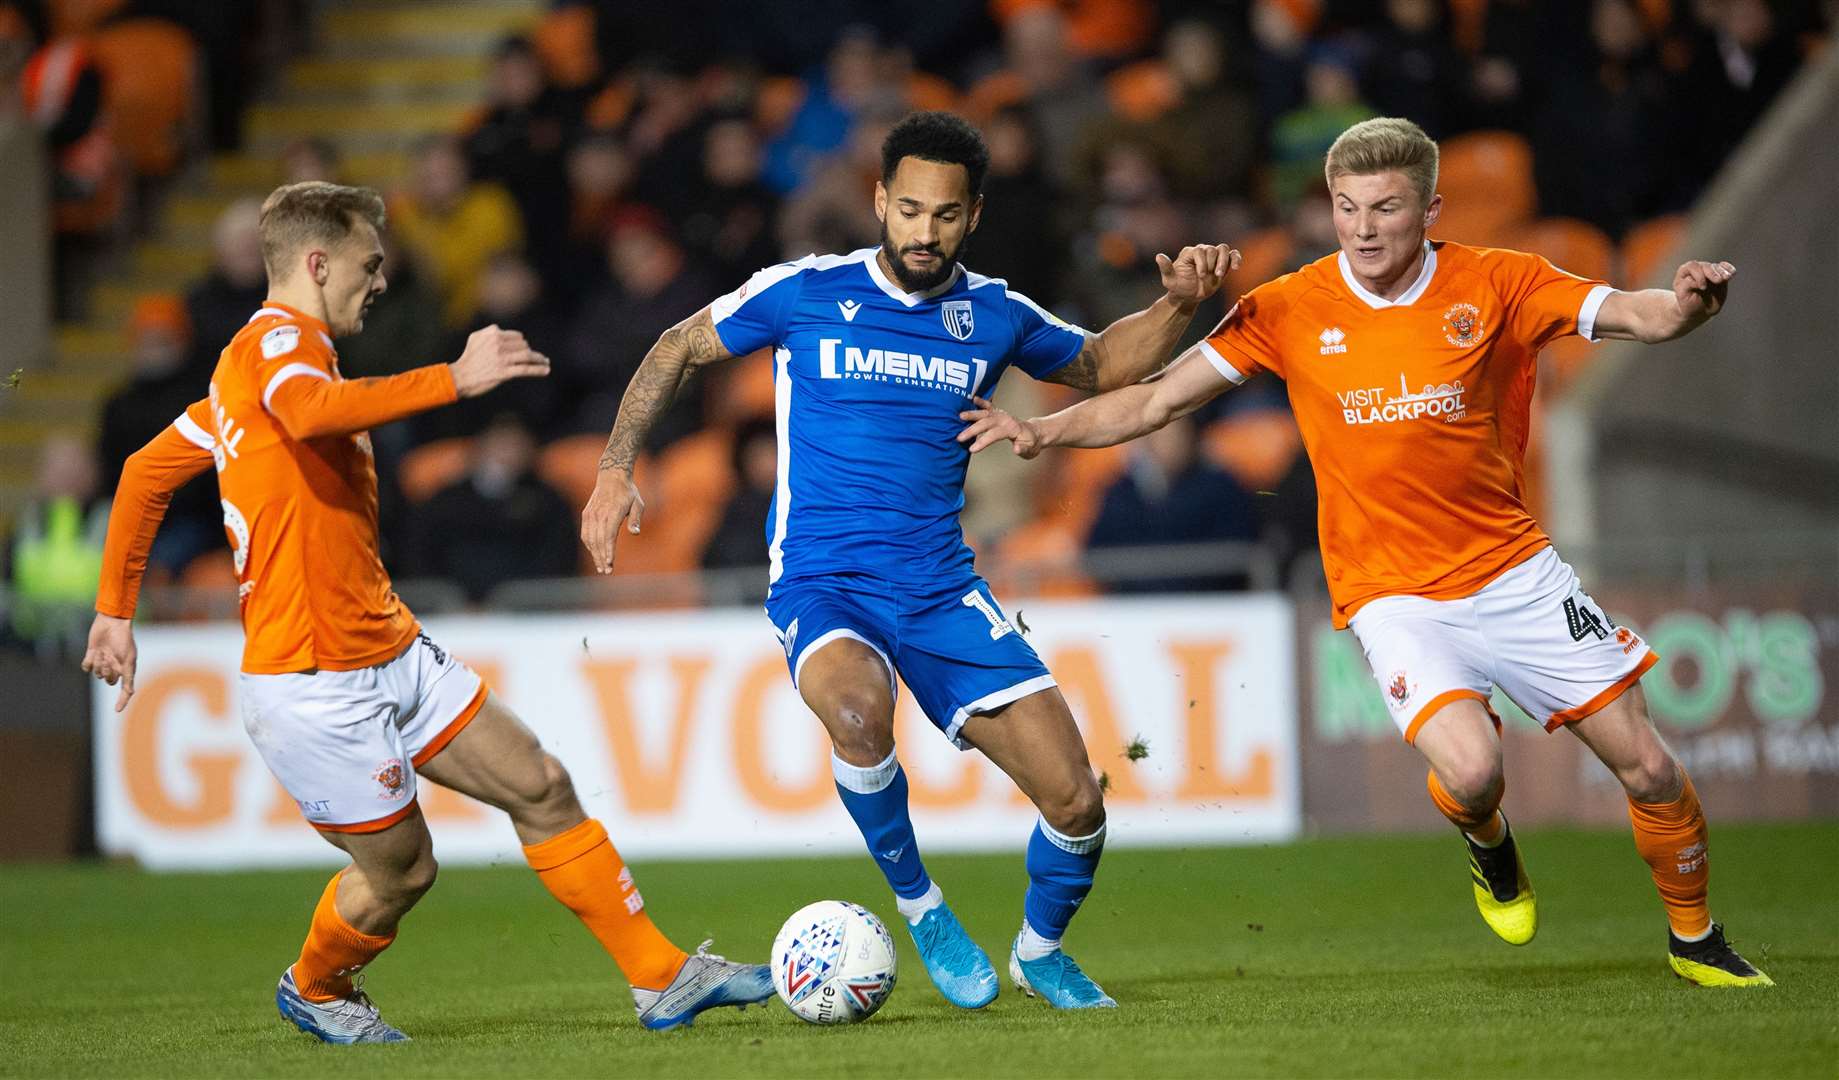 Jordan Roberts is a free agent after being released by Ipswich Town